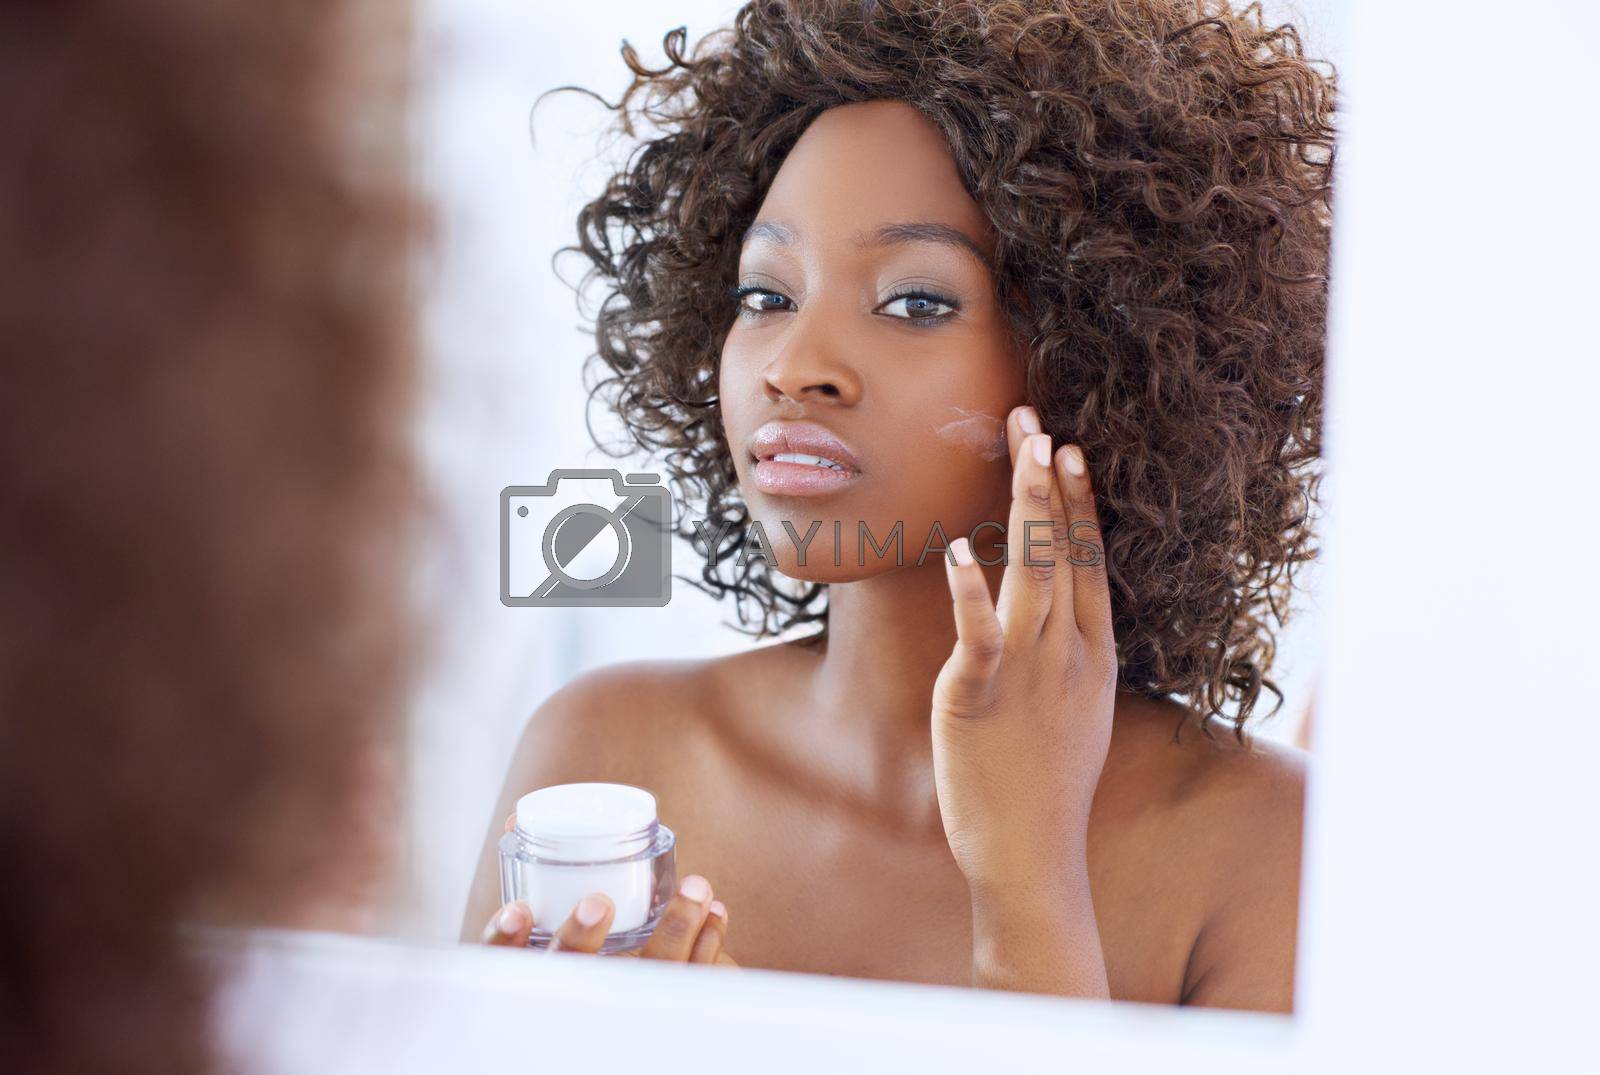 Shot of a beautiful young woman during her daily beauty routine.